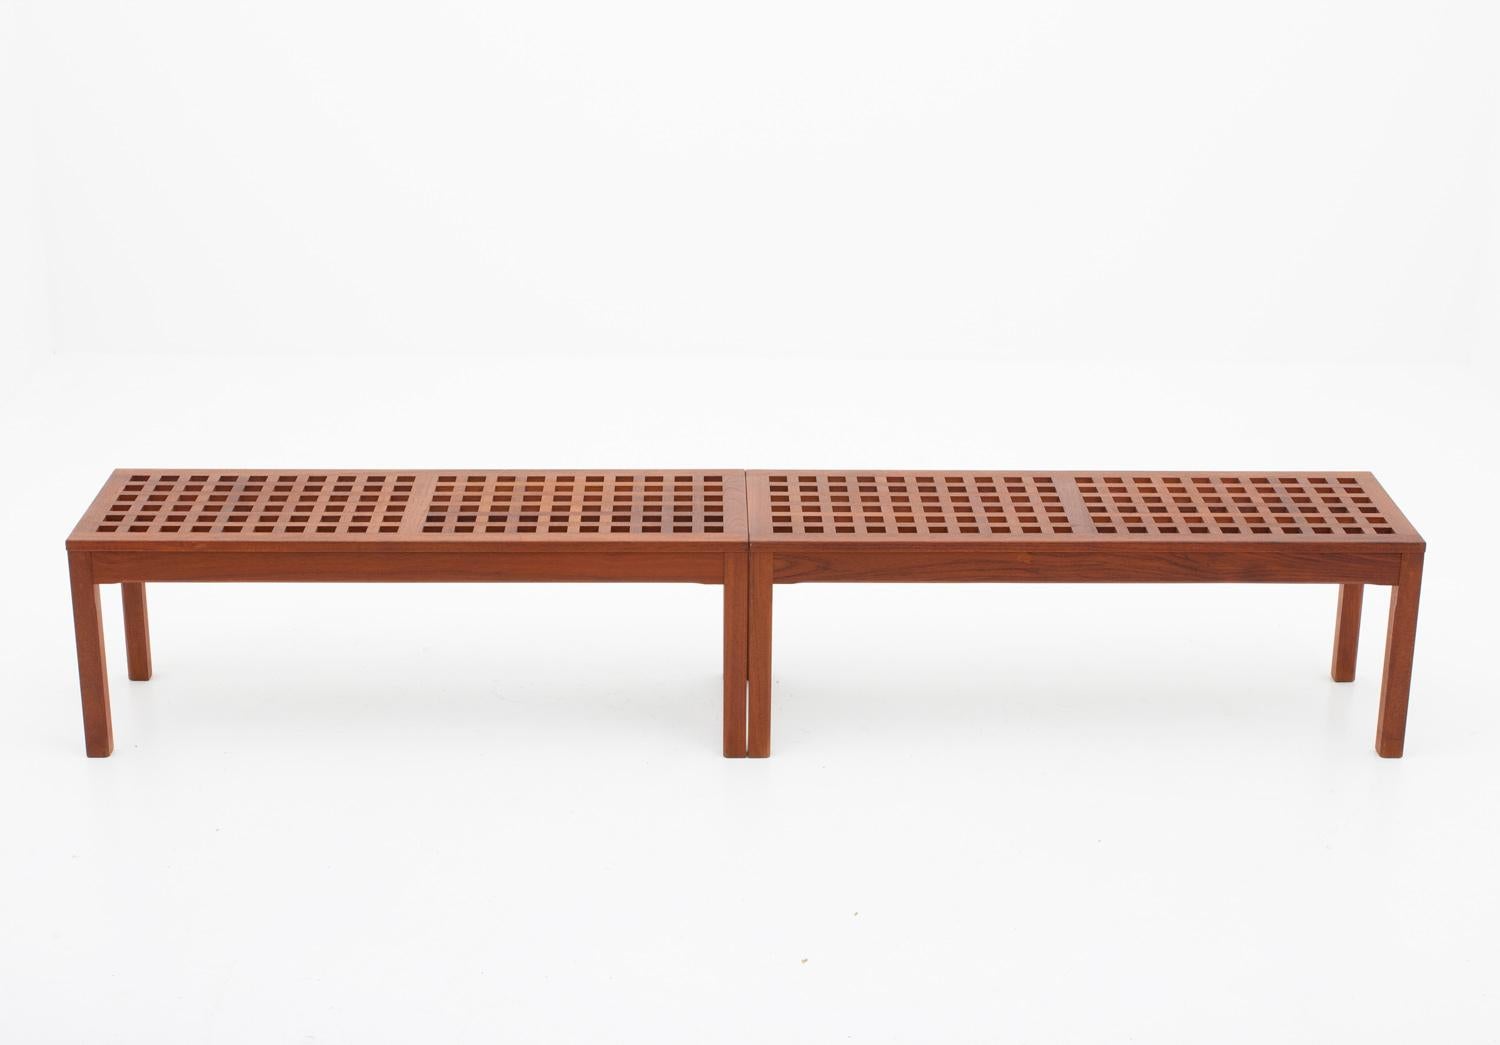 Pair of Scandinavian benches in Teak by John Vedel-Rieper for Källemo (Sweden), 1960s.
Beautiful benches made of solid teak, creating a cross pattern. Very all-round furniture that could be used as, for example, coffee table, plant stand, or media